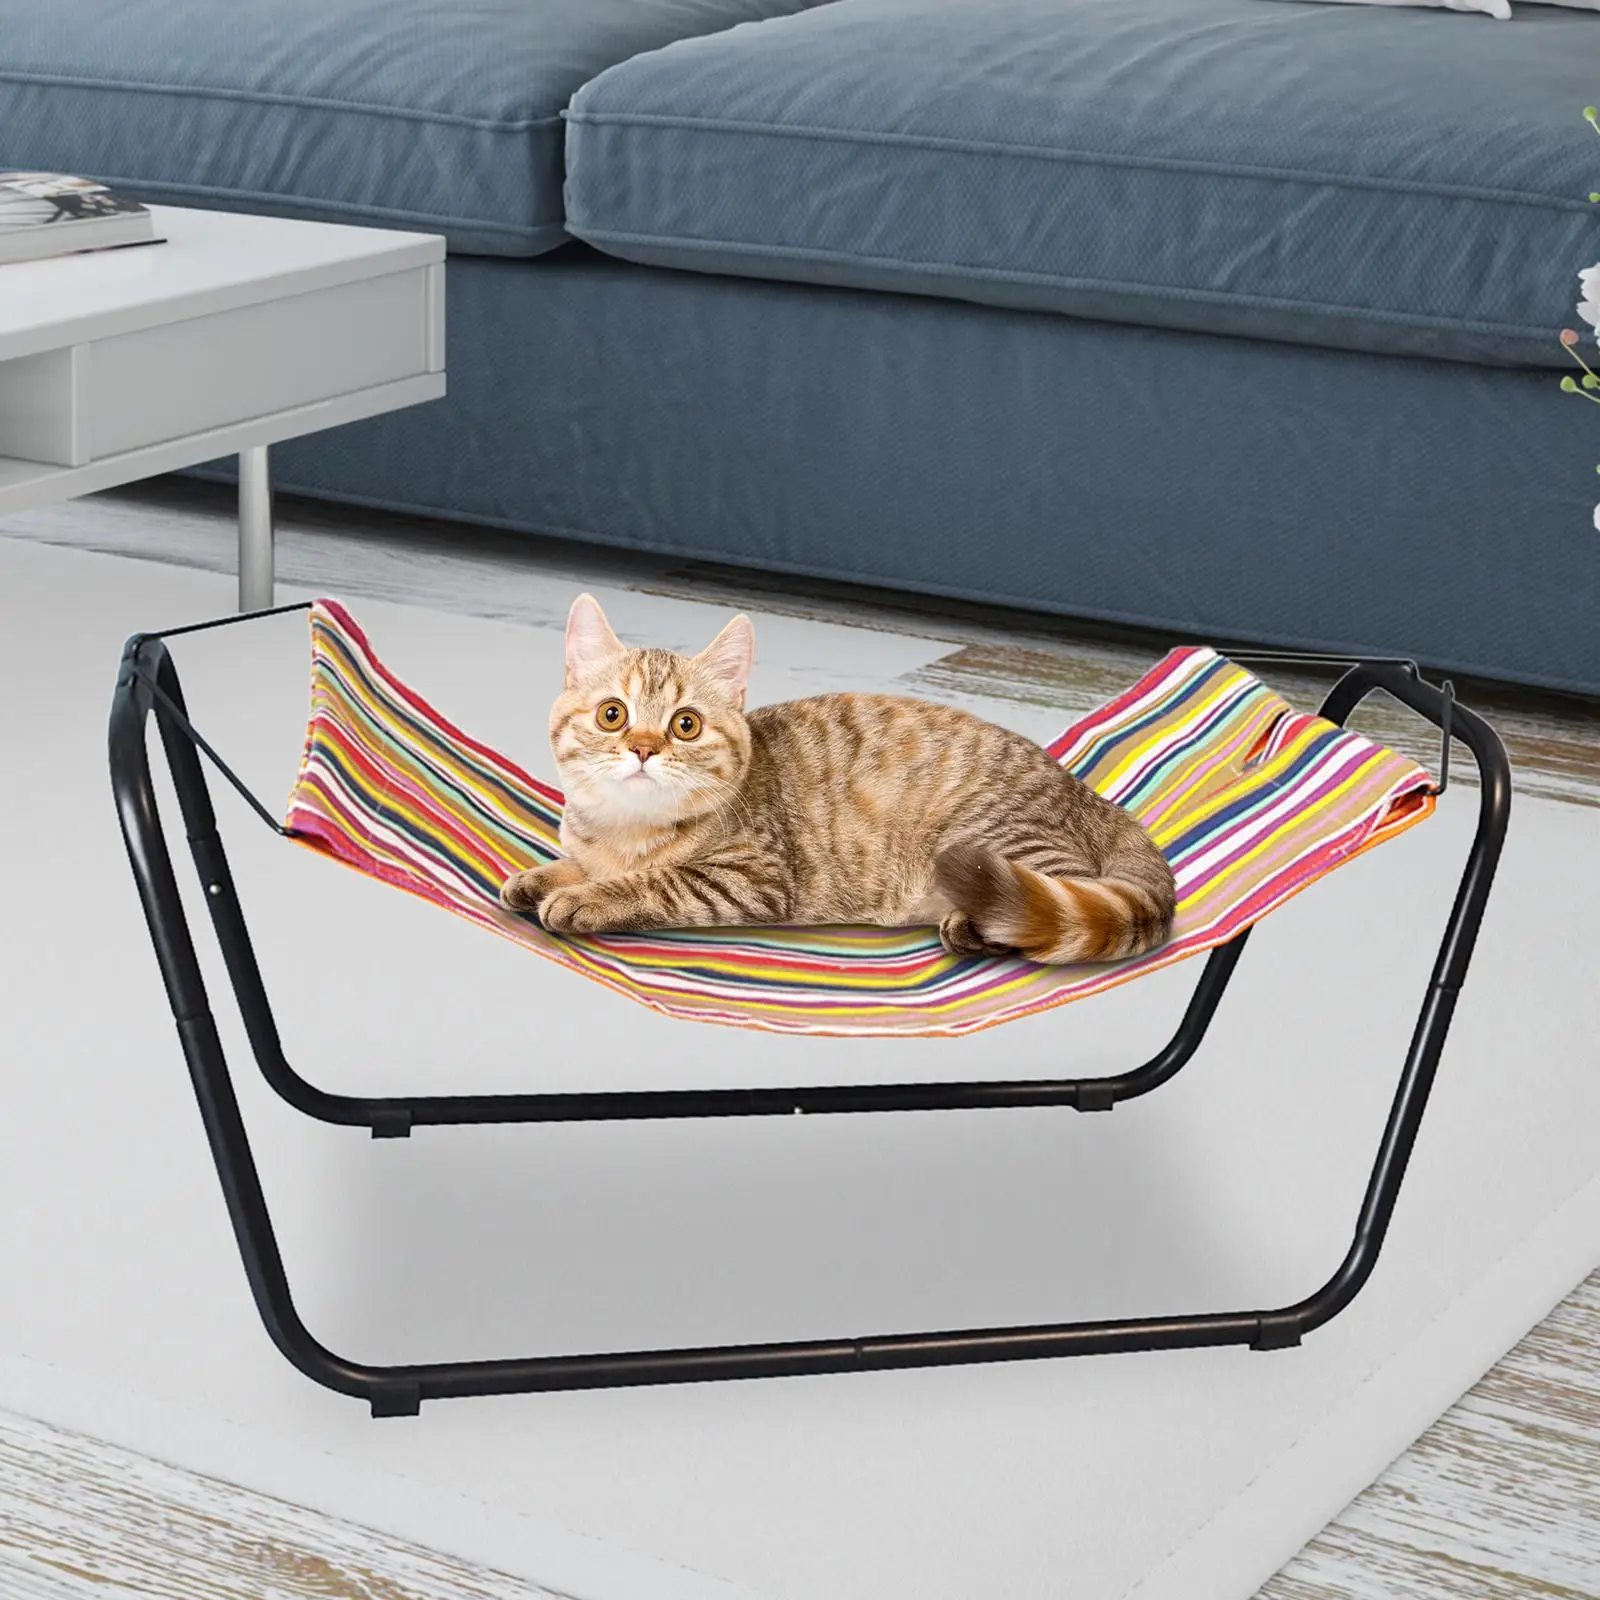 Cat Hammock Dog Sleeping Bed Removable Hanging Cradle Rocking Chair Cat Hammock for Puppy Indoor Cats Dogs Kitten Small Animals